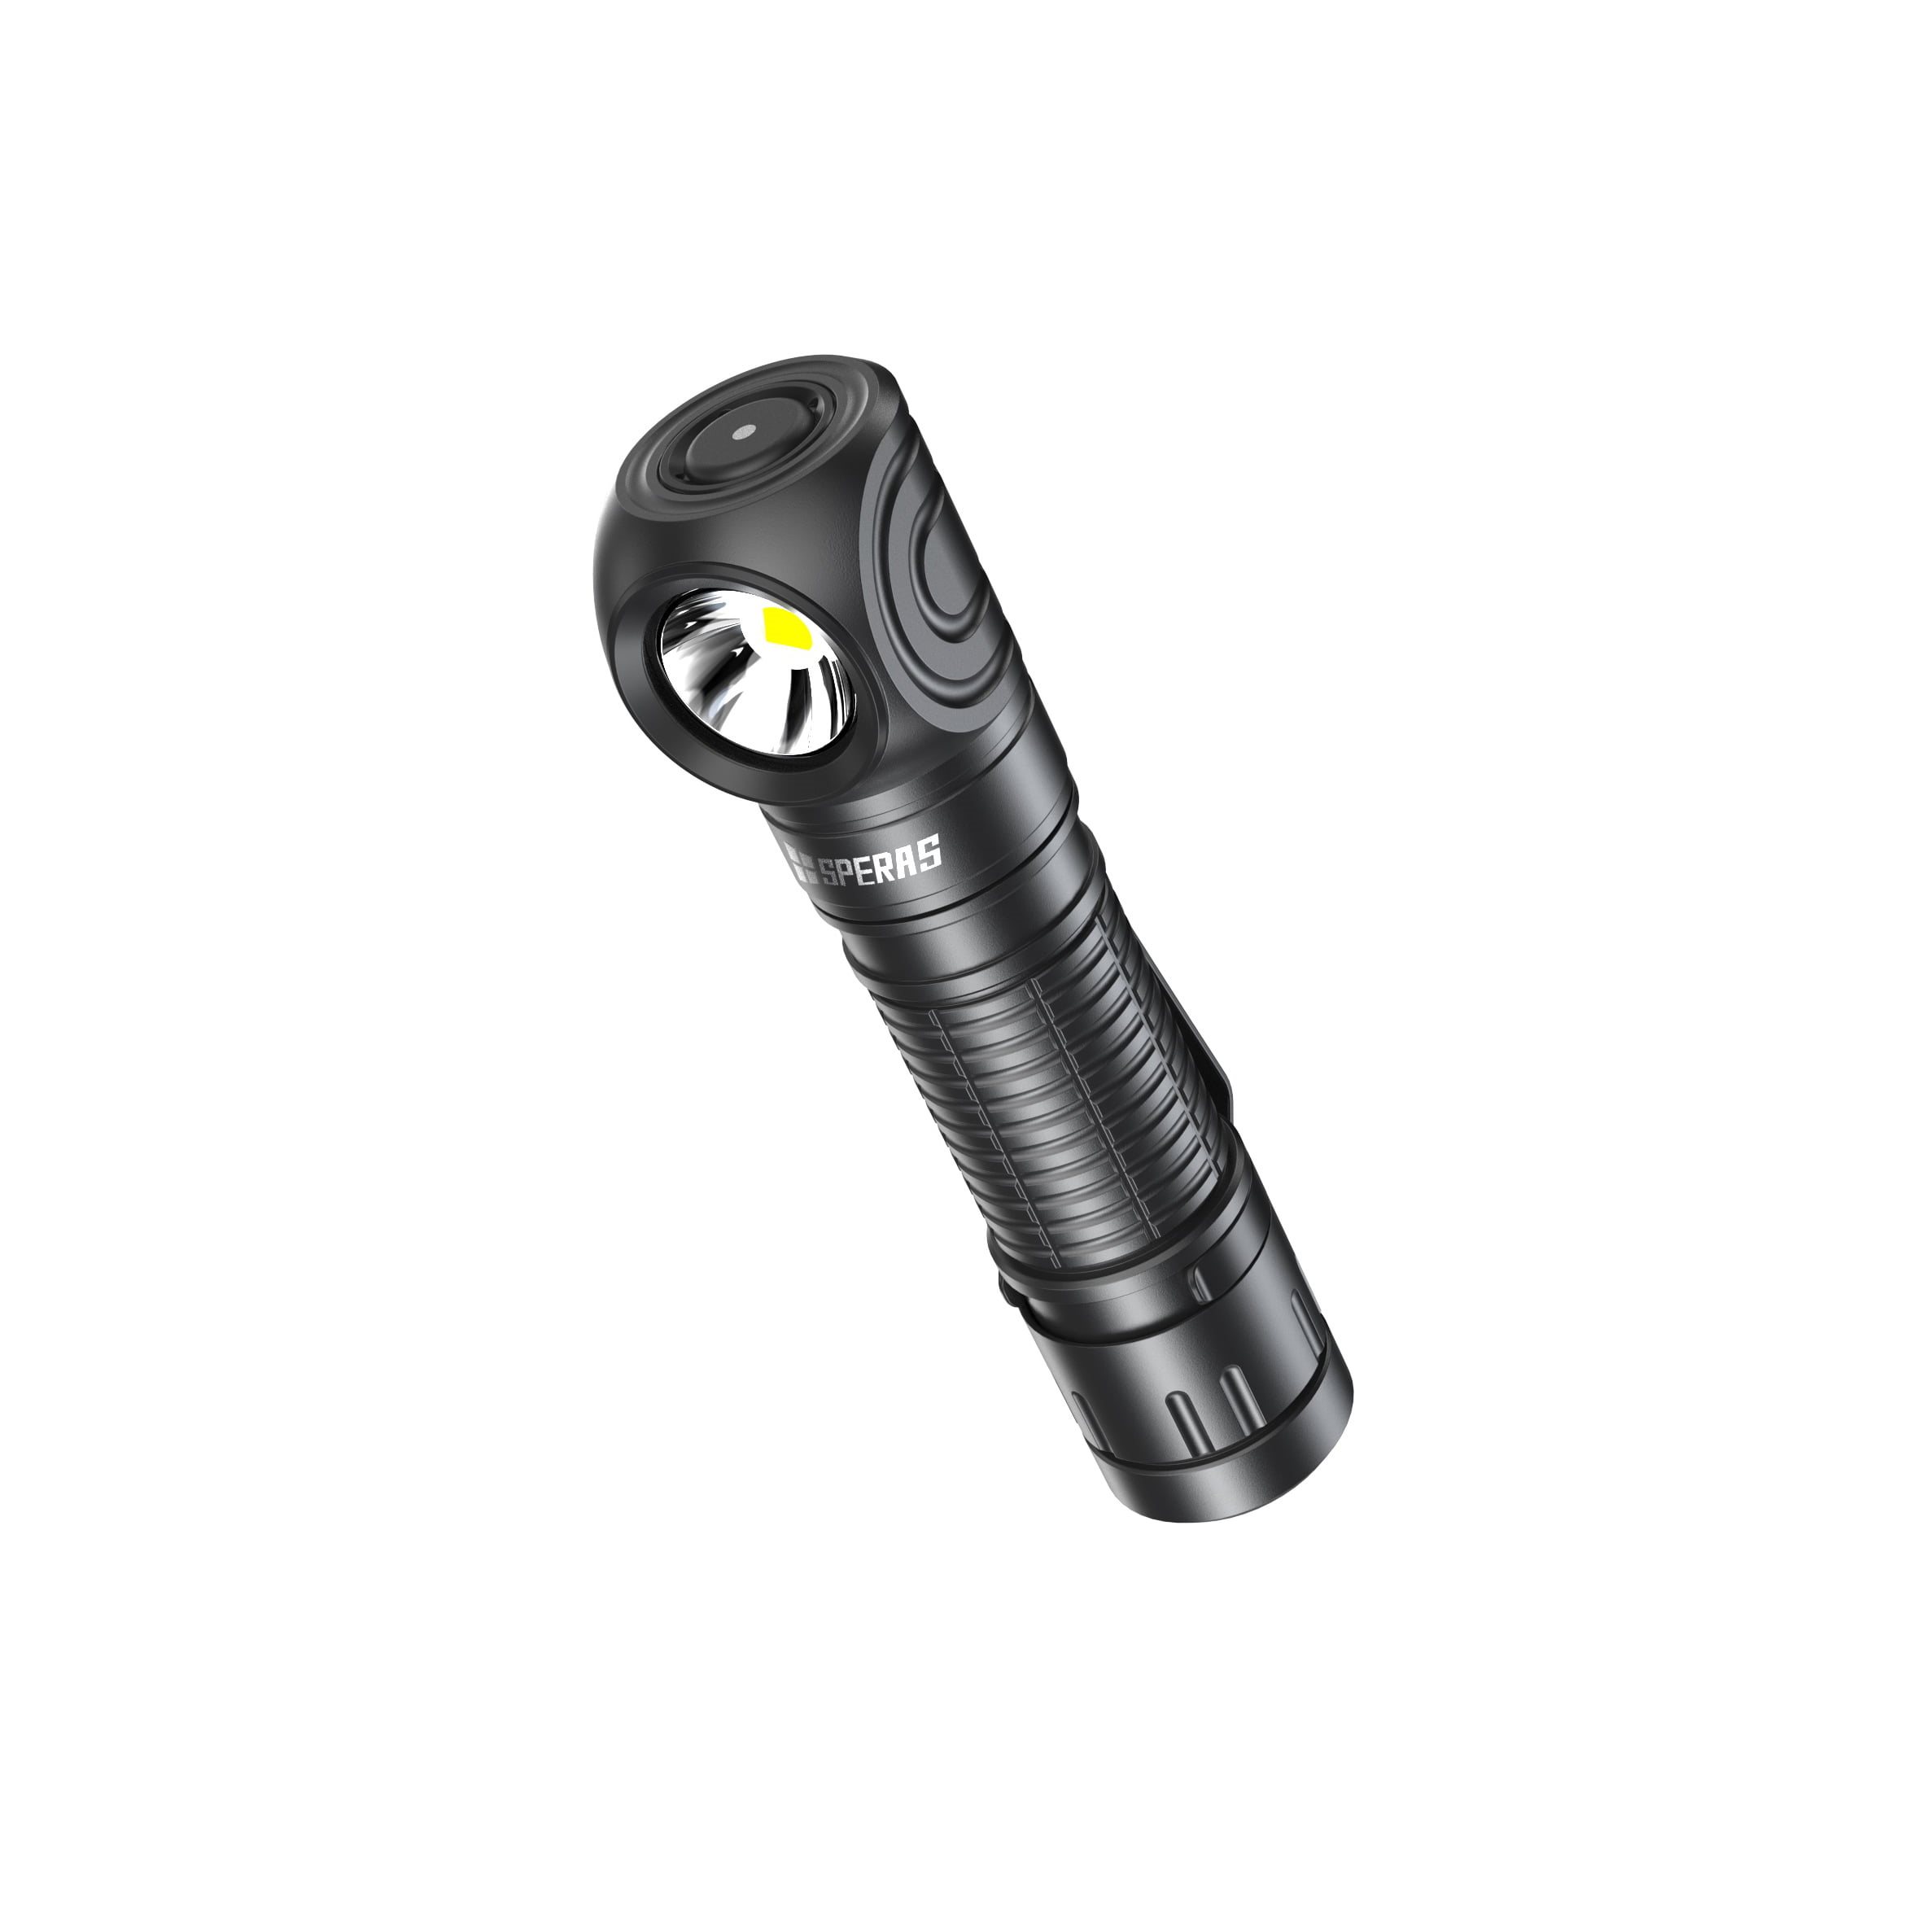 Headlamp M2R rechargeable, right angle, multifunctional, 1200 lumens, 120 metres SPERAS M2R-SP L-11